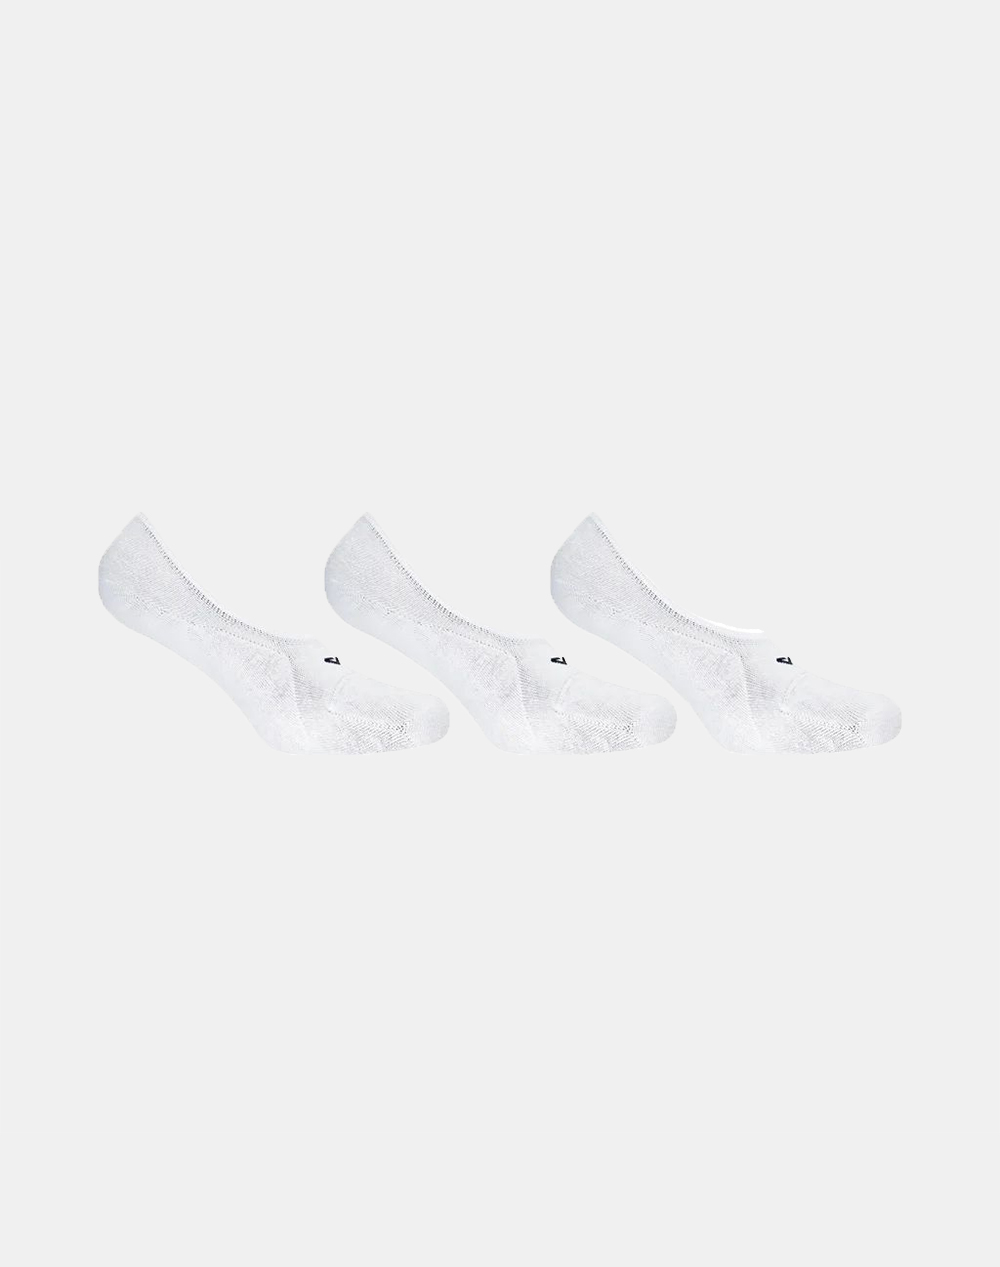 FILA F1252-3 Unisex Collection Ghost SOCK